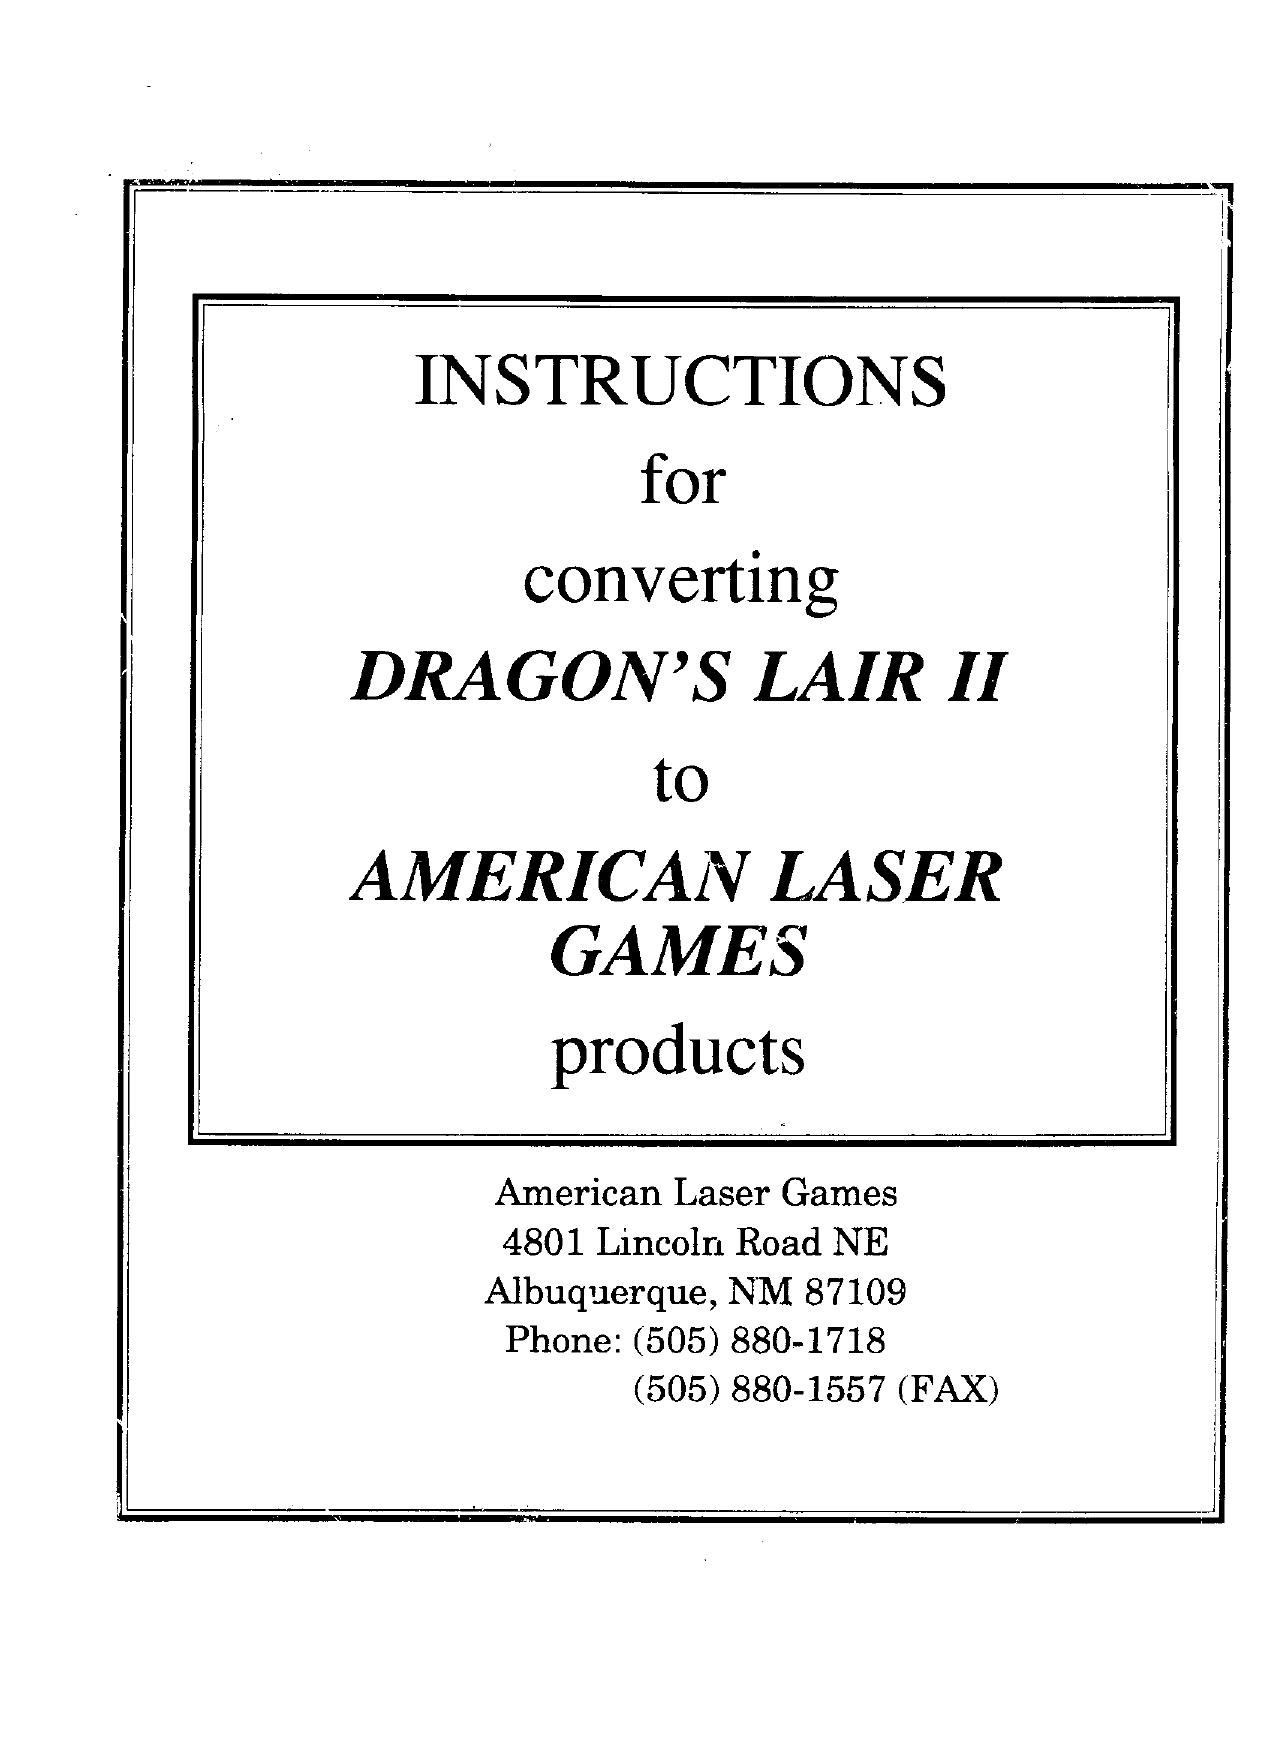 Dragon's Lair 2 to American Laser Games (Ins for Conversion) (U)